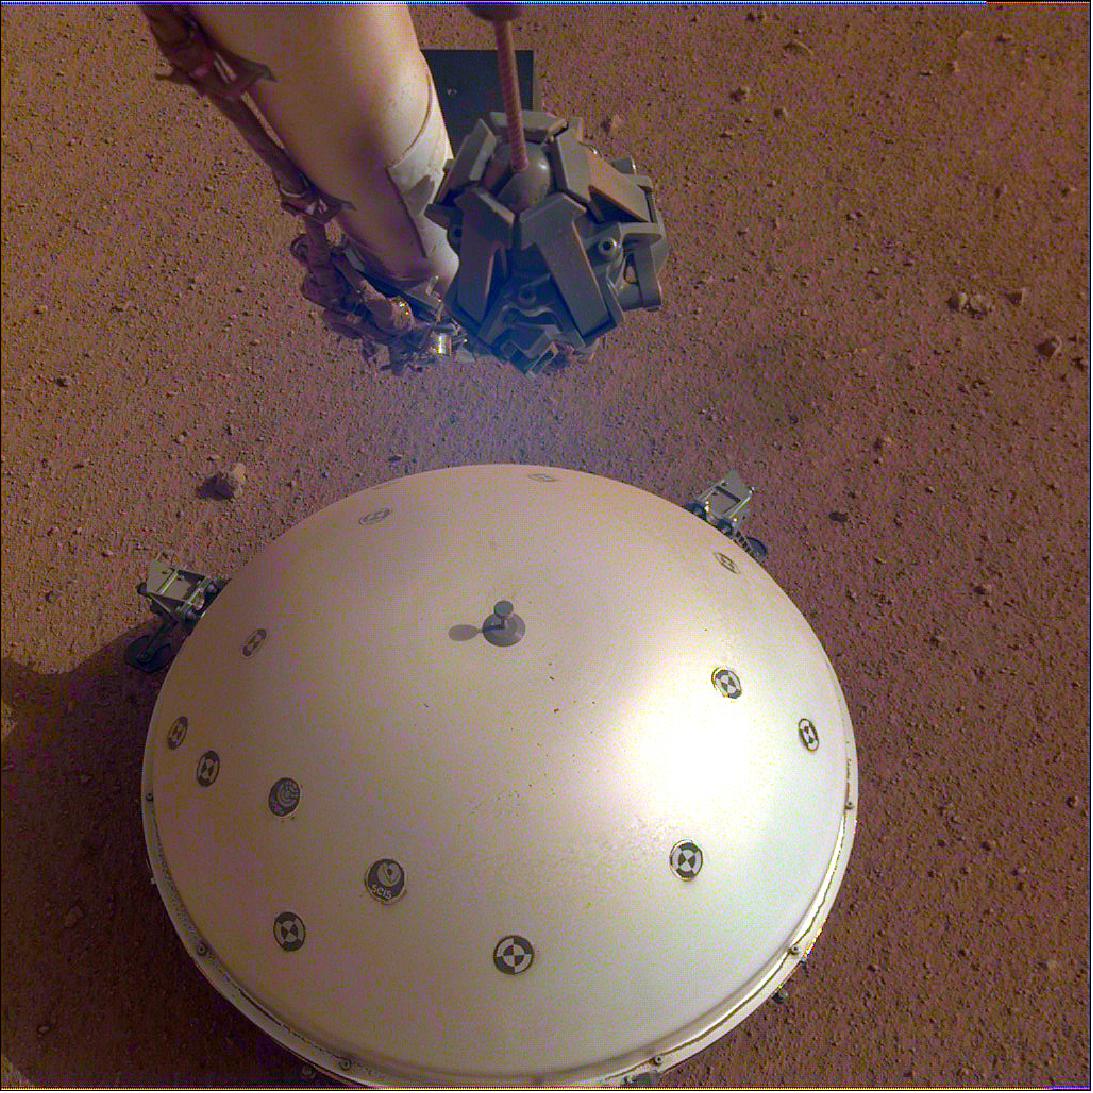 Figure 20: This image shows InSight’s domed Wind and Thermal Shield, which covers its seismometer, called Seismic Experiment for Interior Structure (SEIS), image credit: NASA/JPL-Caltech